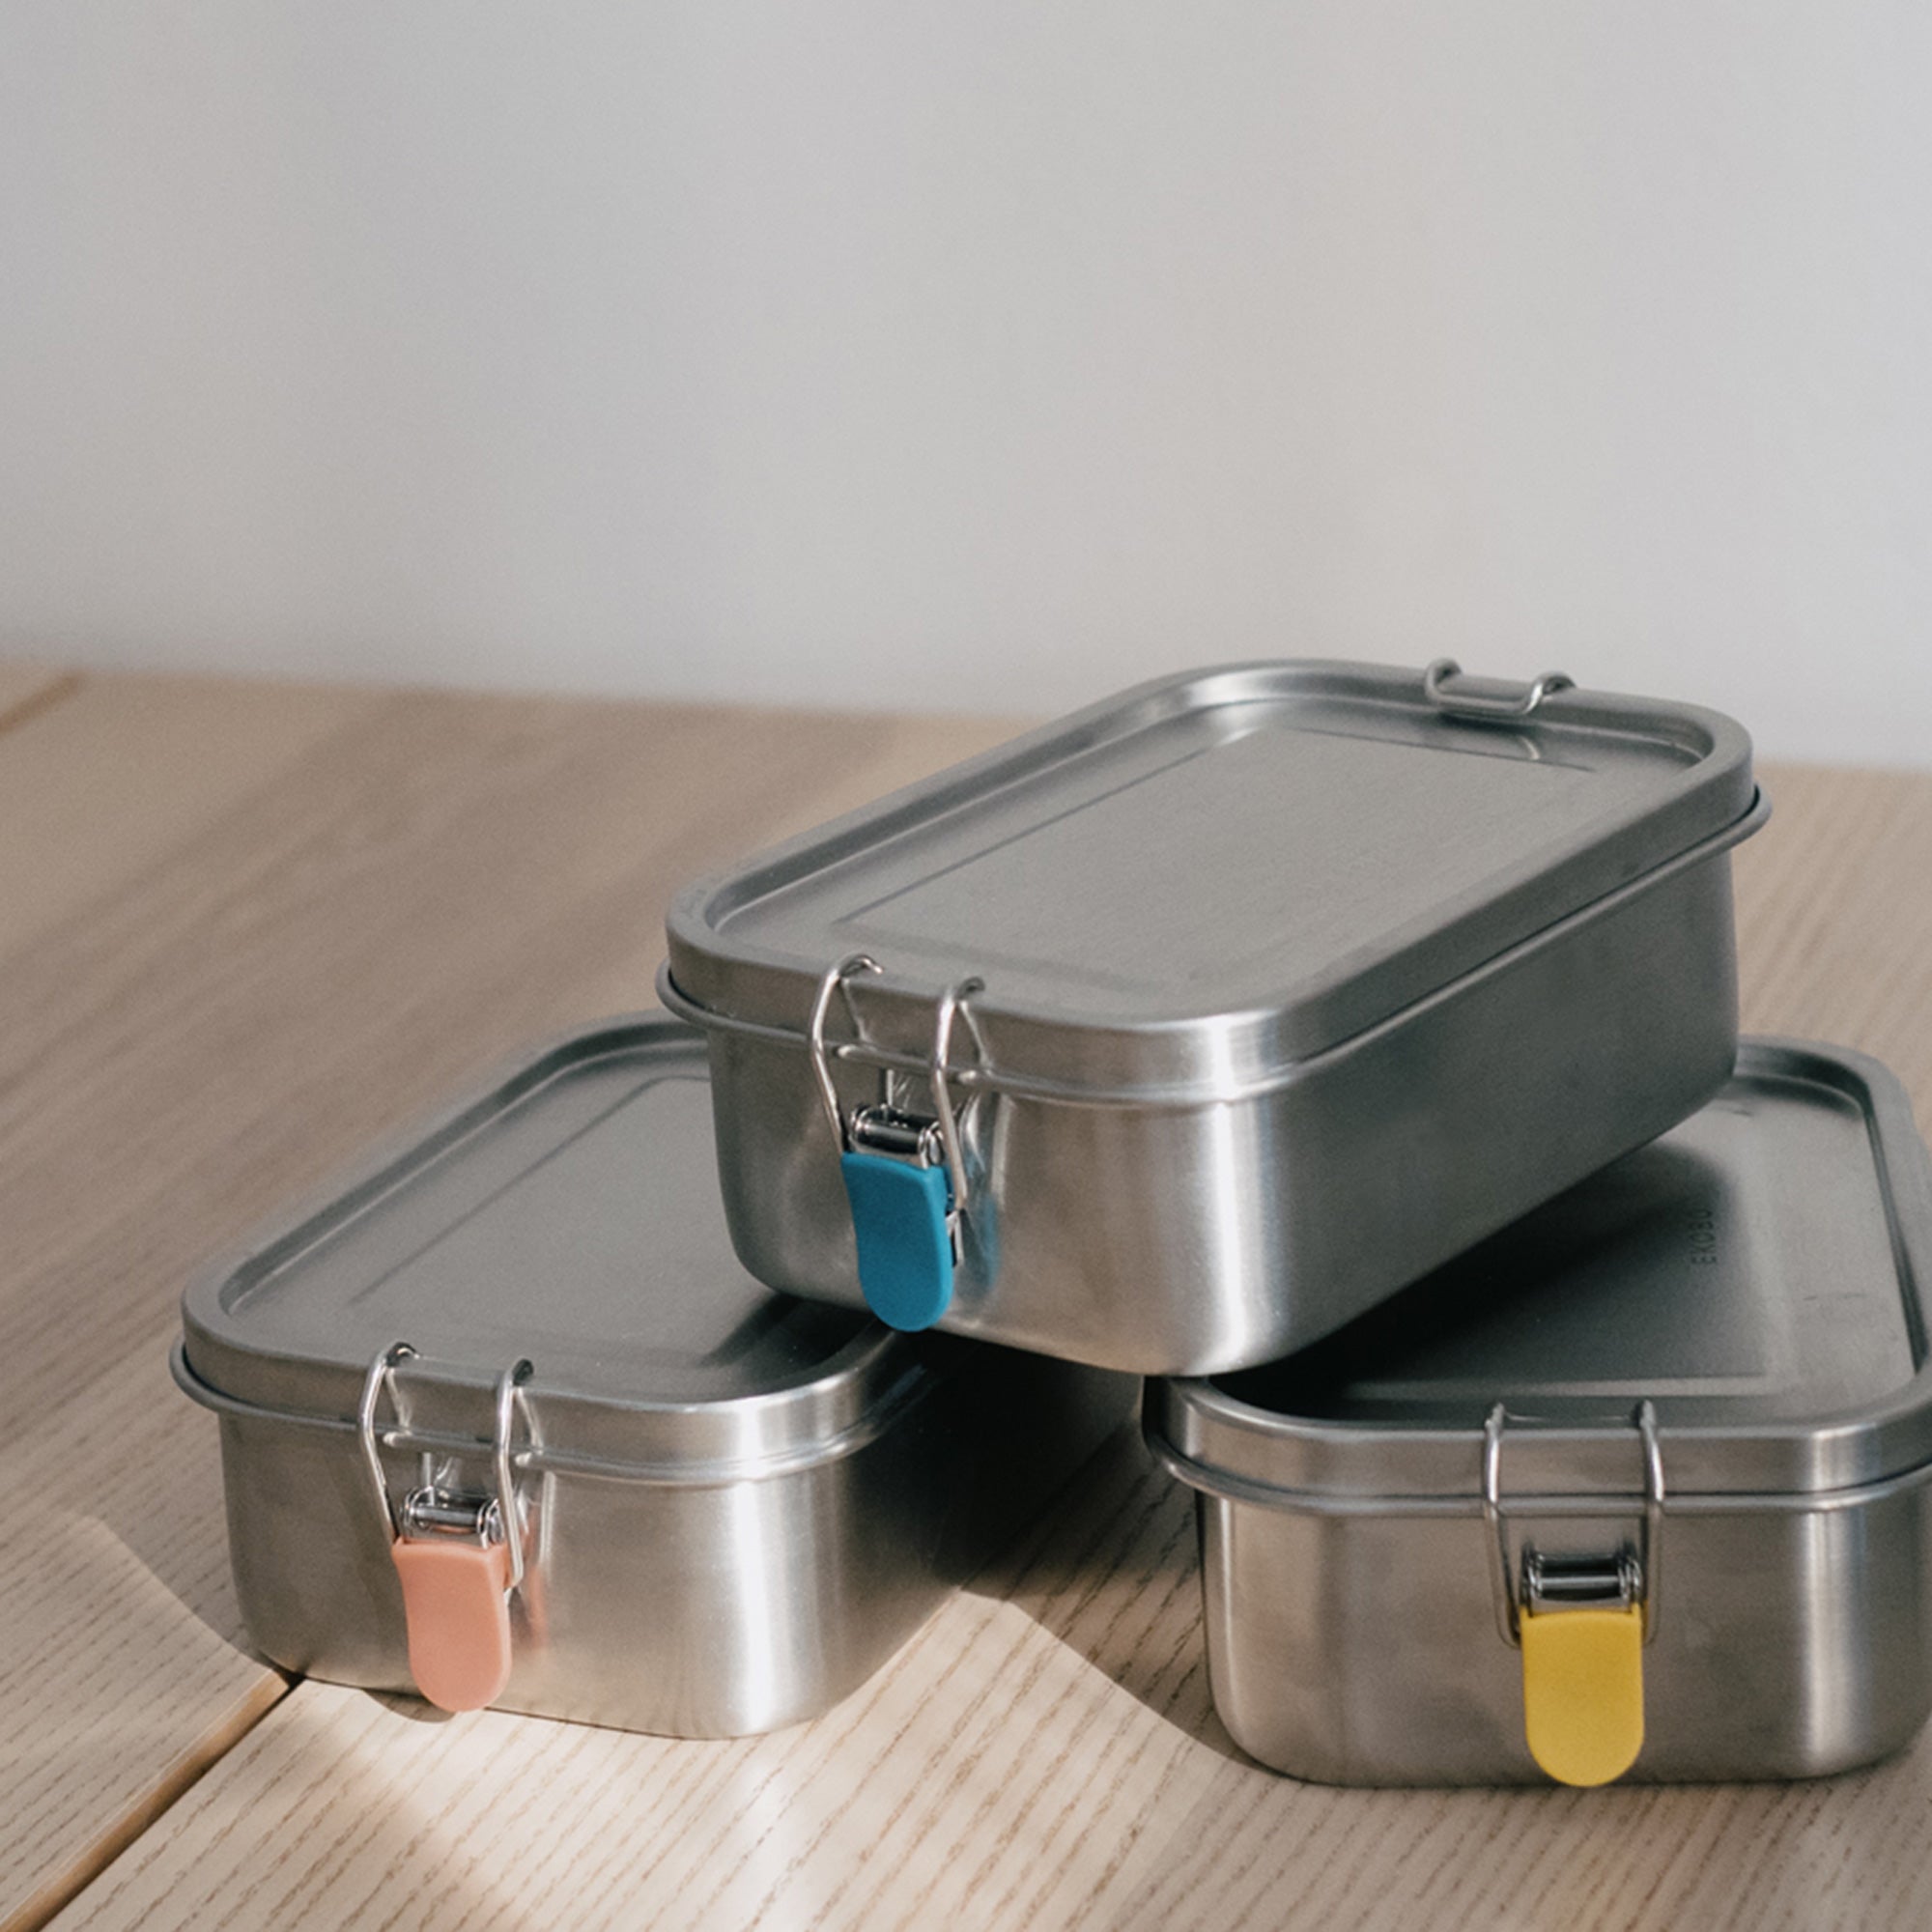 Stainless Steel Lunch Box with heat safe insert - Terracotta